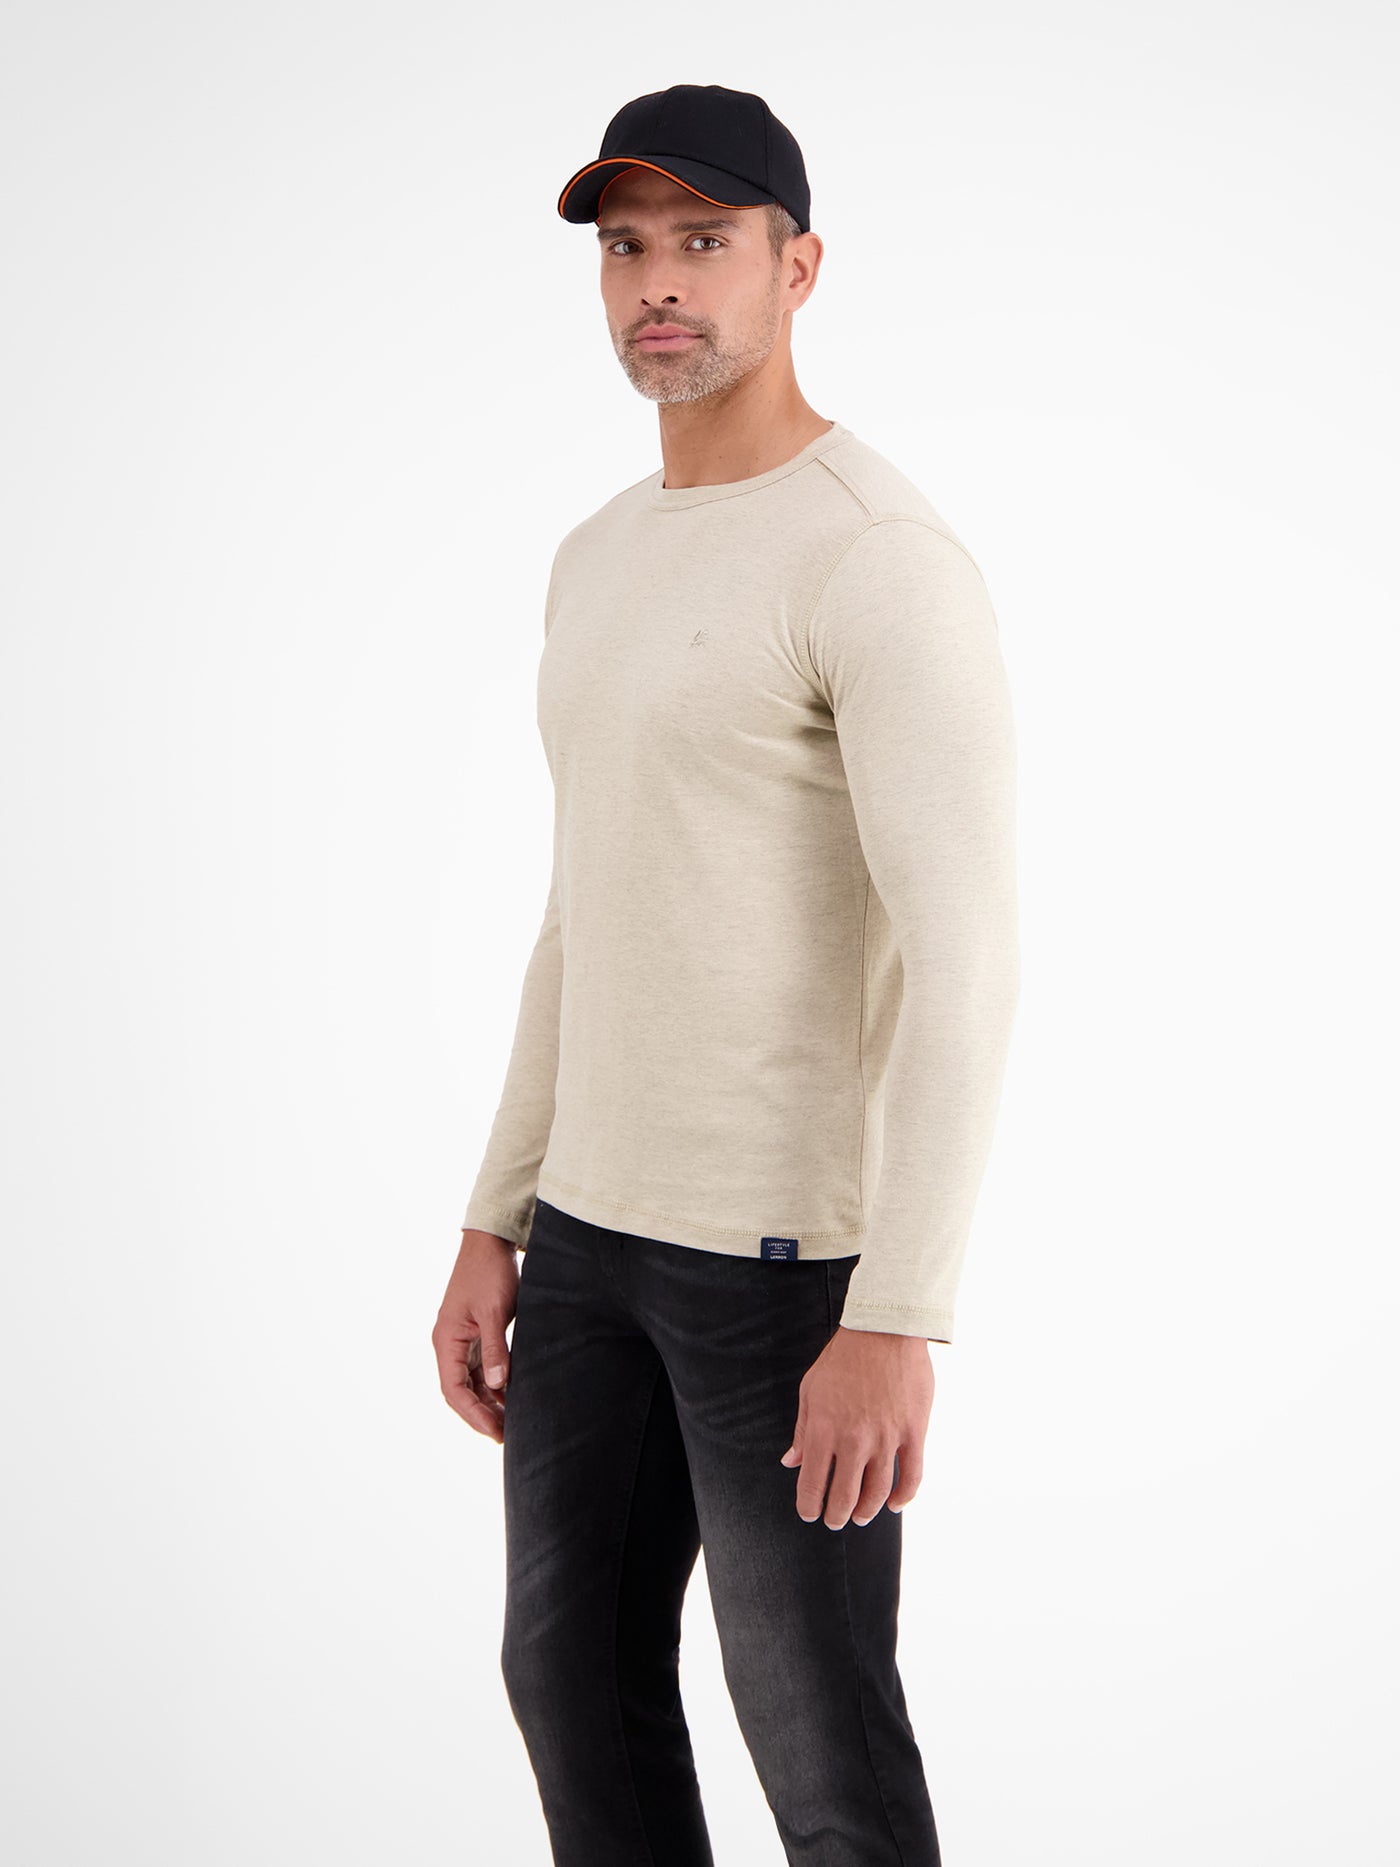 Structured long sleeve